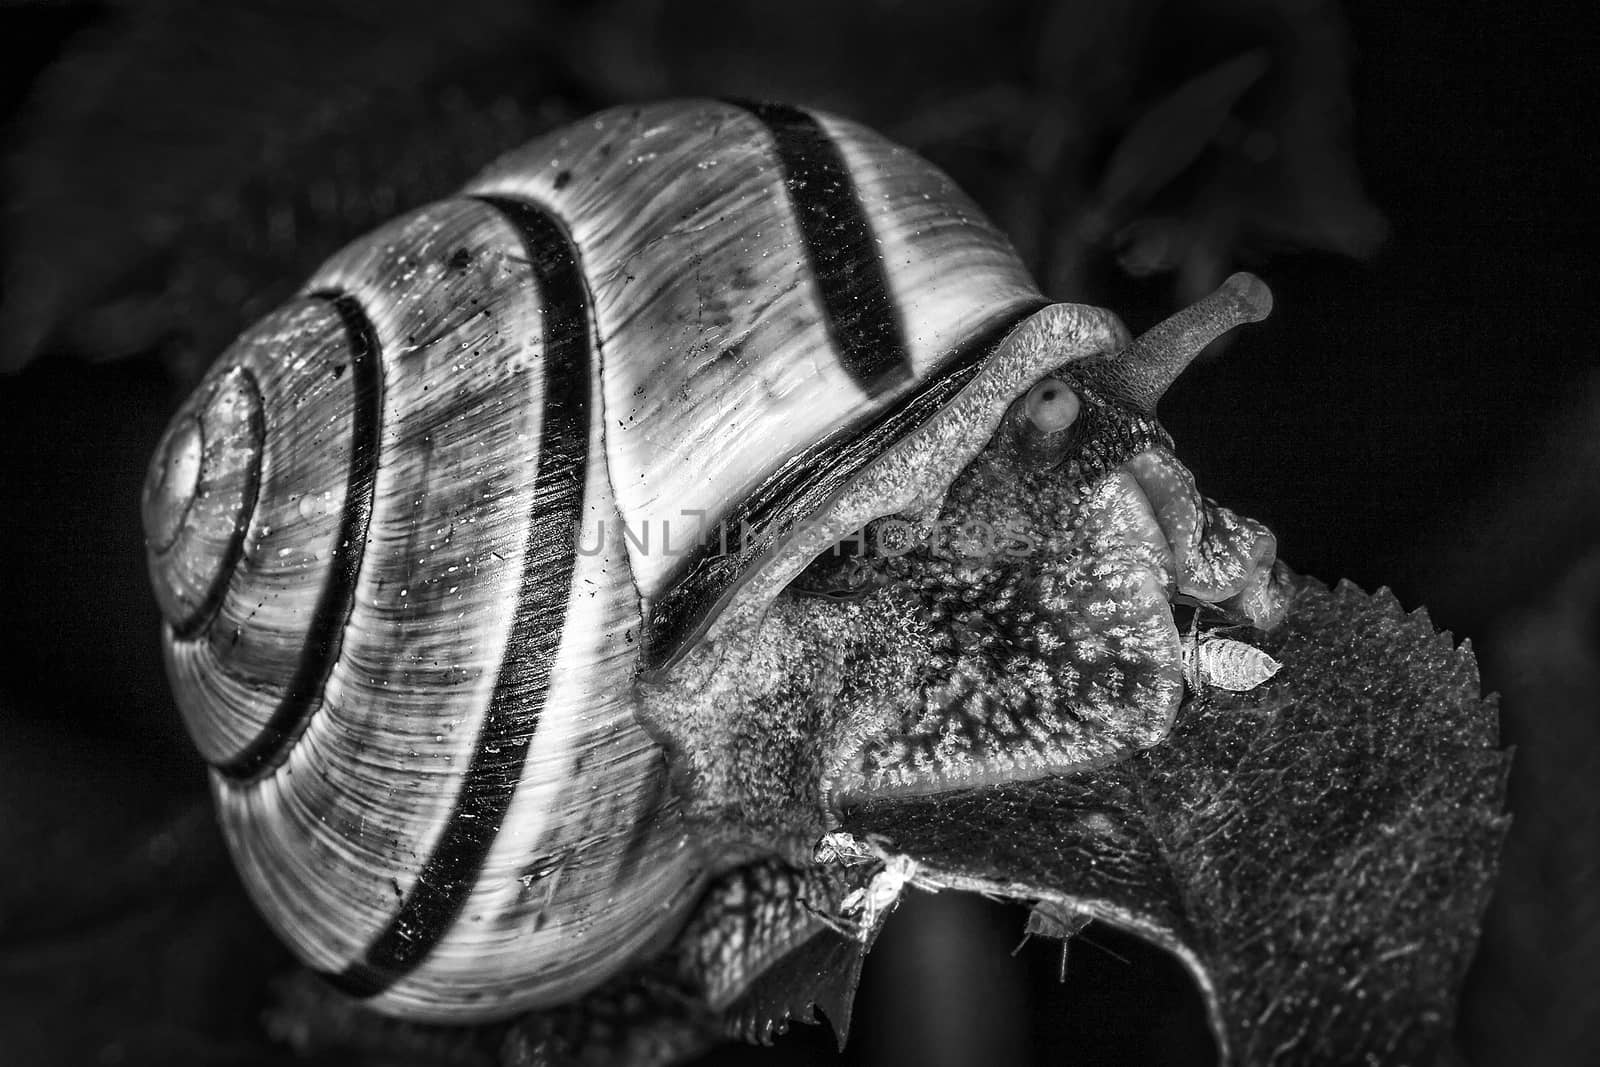 Garden snail which is a mollusc gastropod insect with a shell black and white monochrome image